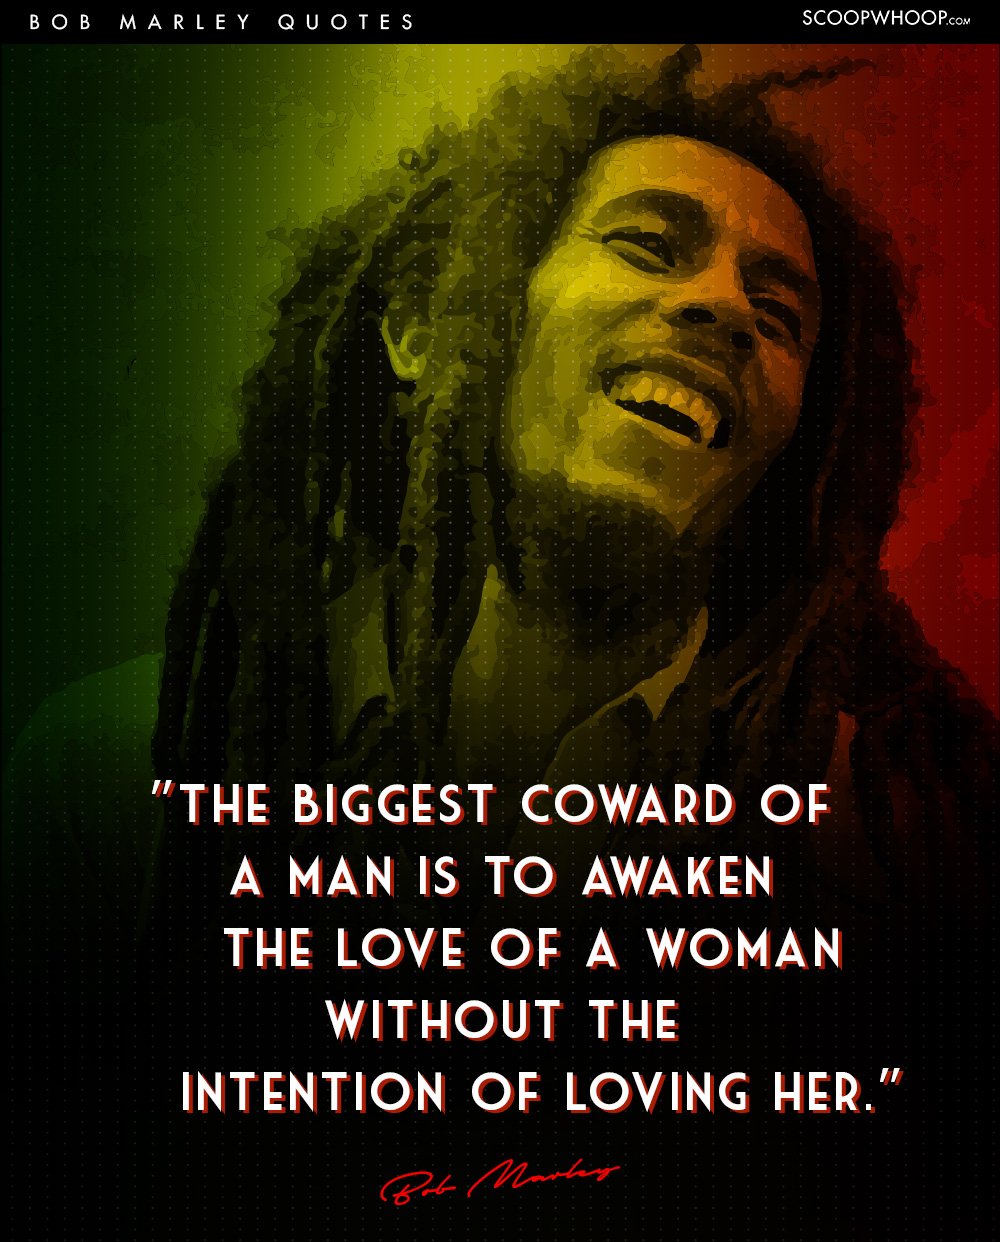 Life Quotes Bob Marley Quotes About Women / 24 Bob Marley Quotes That